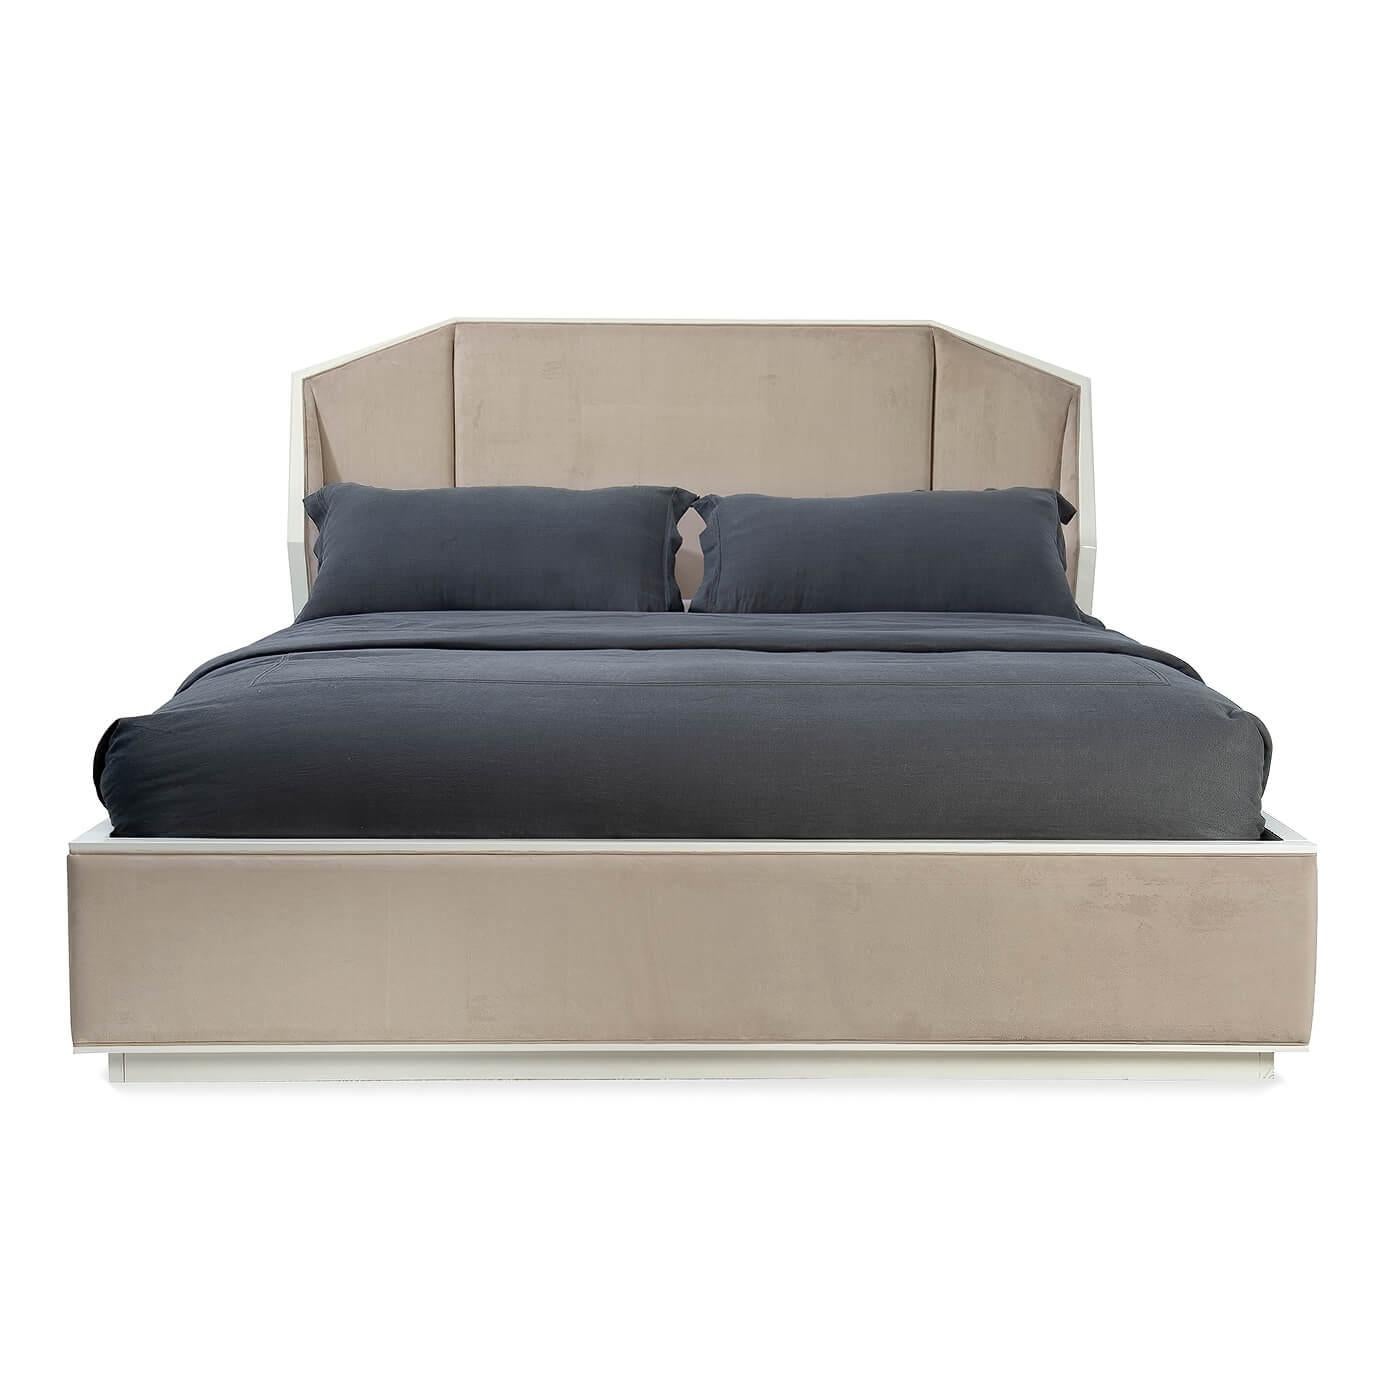 An Art Deco-inspired upholstered queen bed with an upholstered canted corner headboard having envelope sides. The Art Deco geometric-inspired design gives a nod to the Architecture of the 1930s. 

Tailored with great care, it offers comfort and